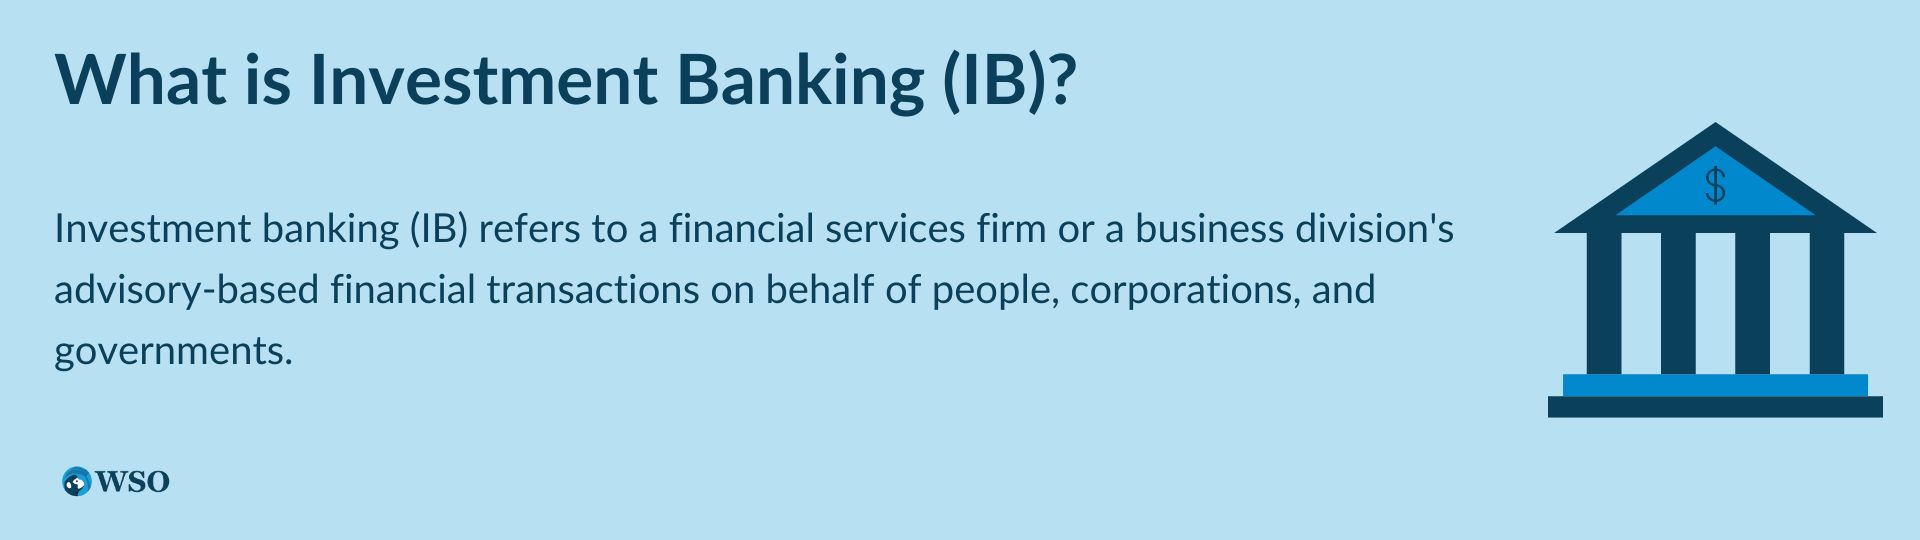 What is Investment Banking (IB)?